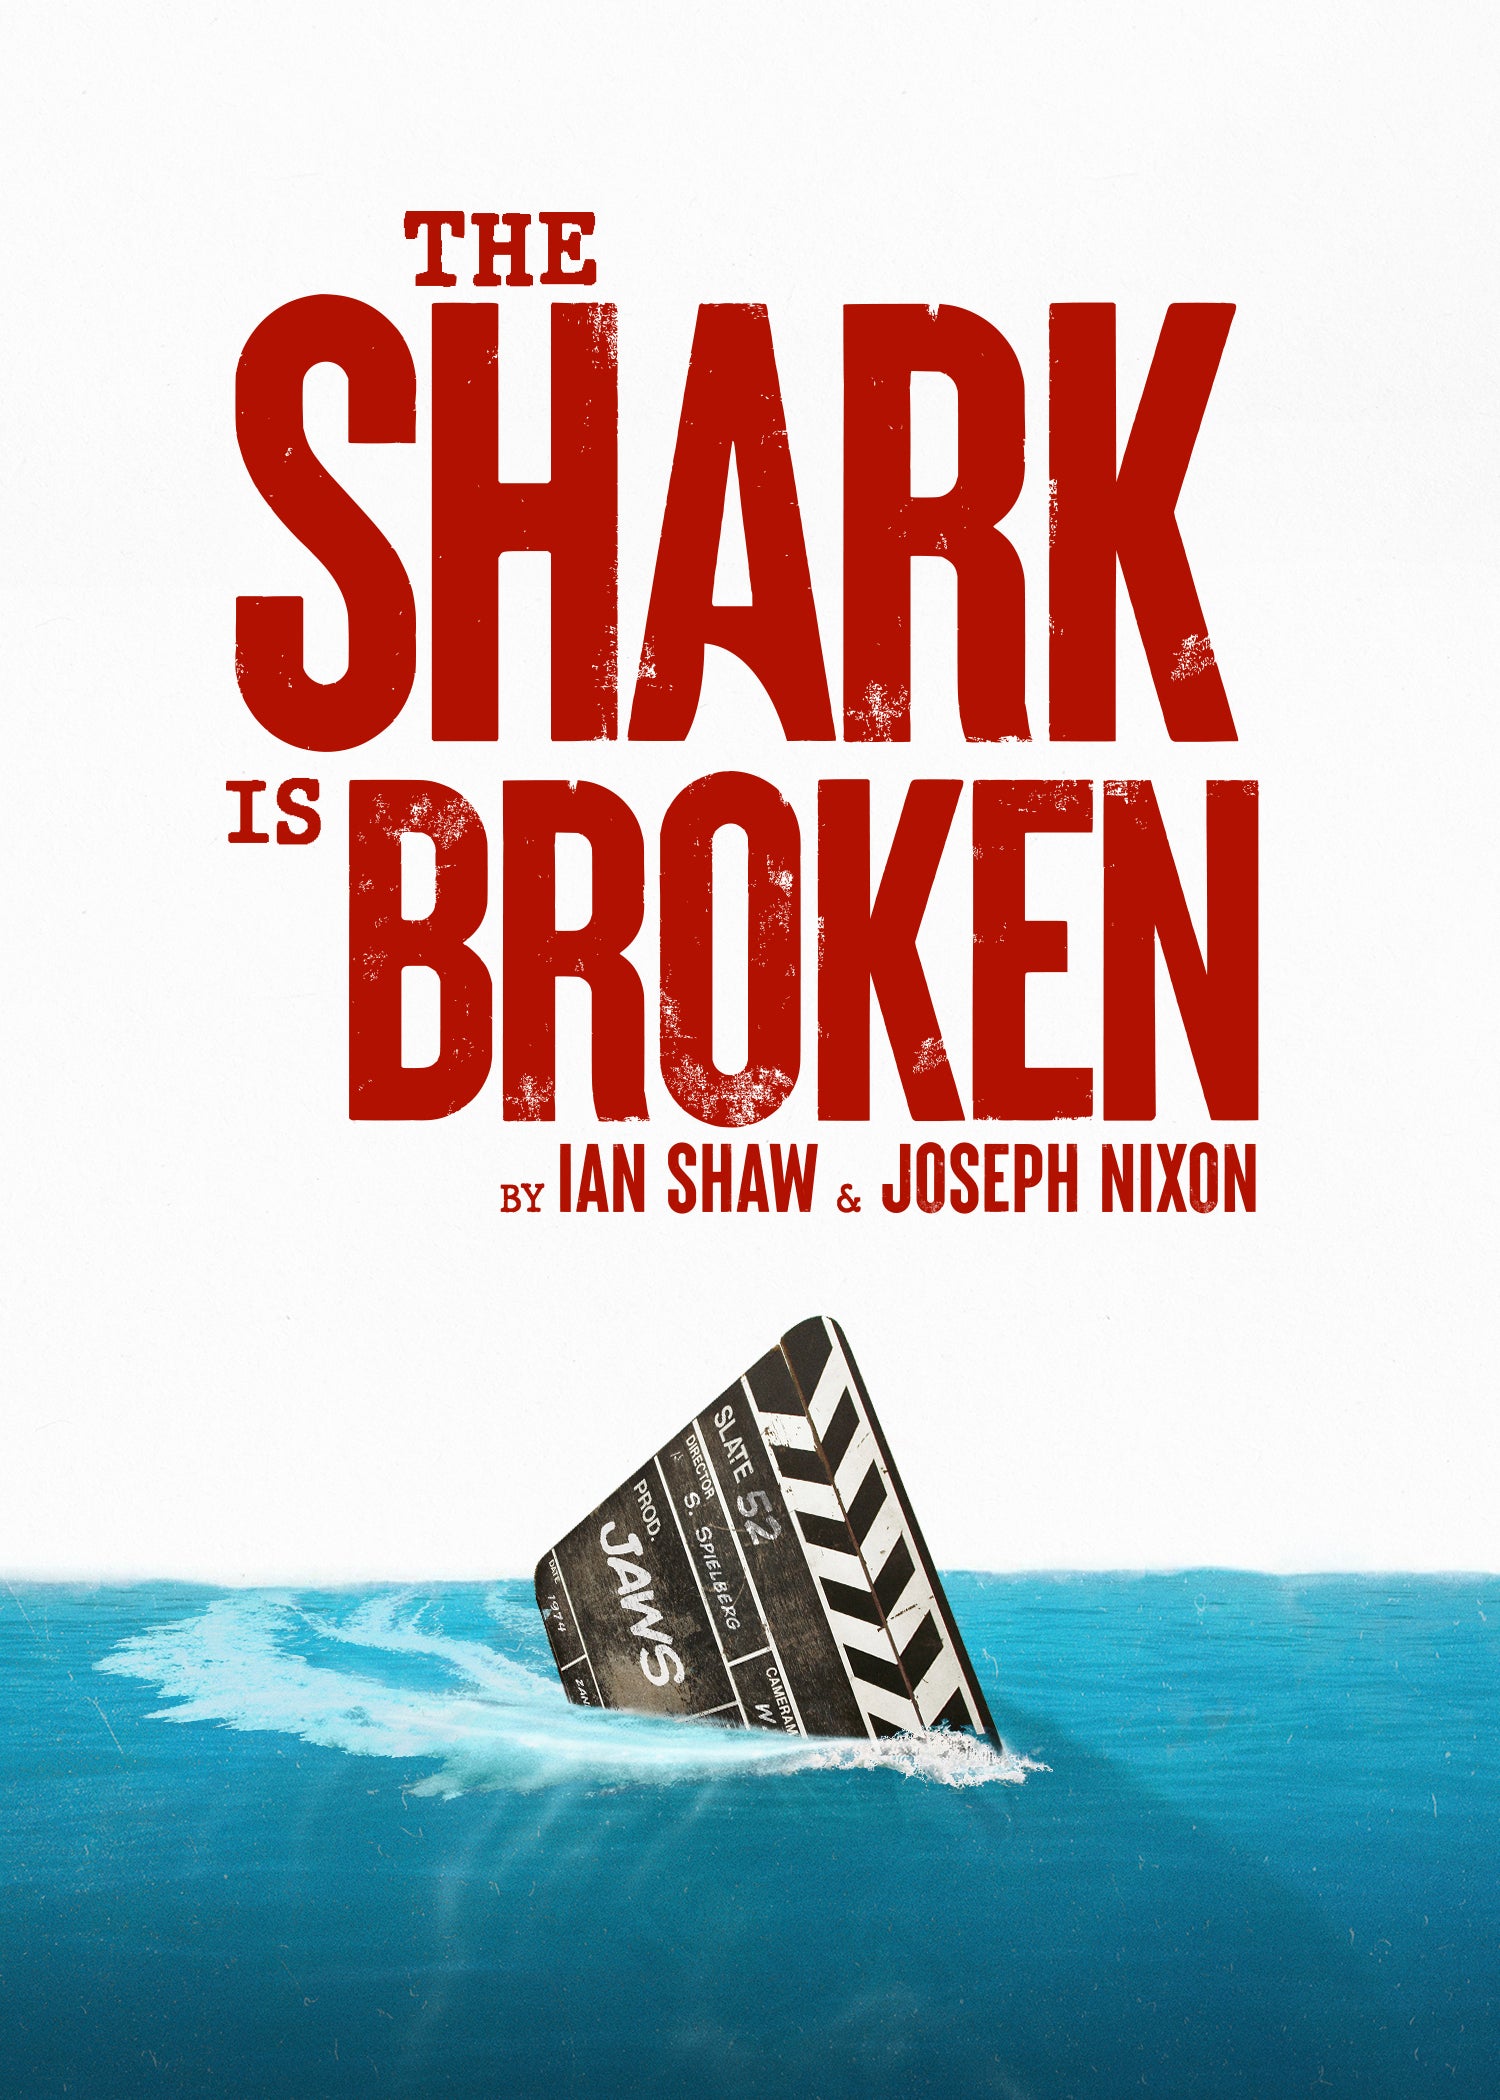 This image released by Polk & Co. shows promotional art for "The Shark is Broken," a stage play about the making of the blockbuster movie “Jaws.”